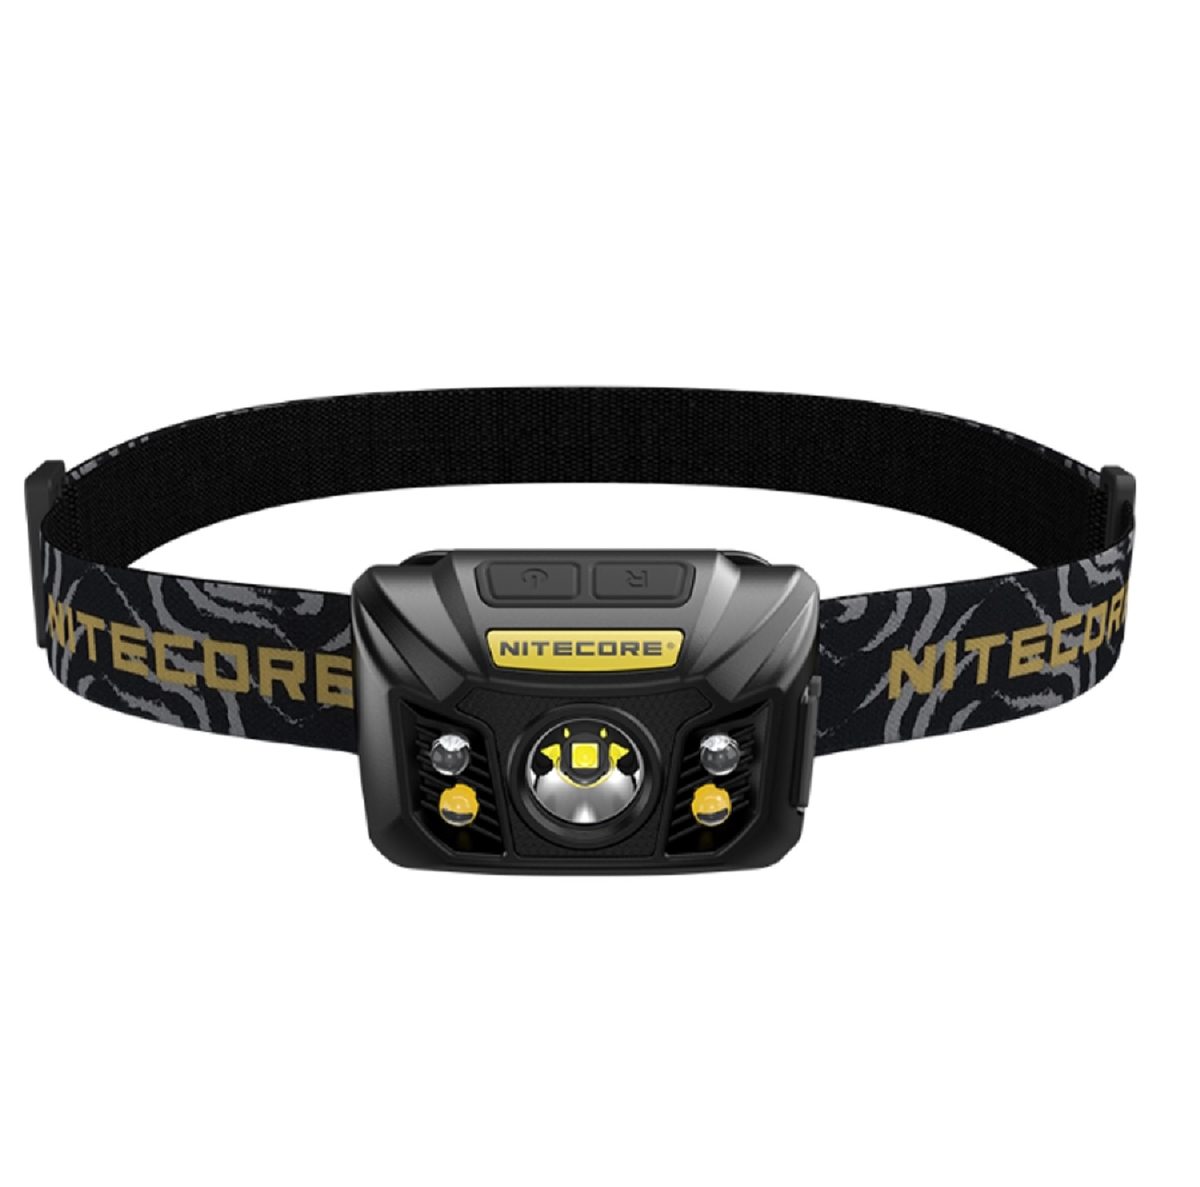 Green Nitecore 9004722 Sysmax Industrial Nu20 USB Rechargeable Headlamp